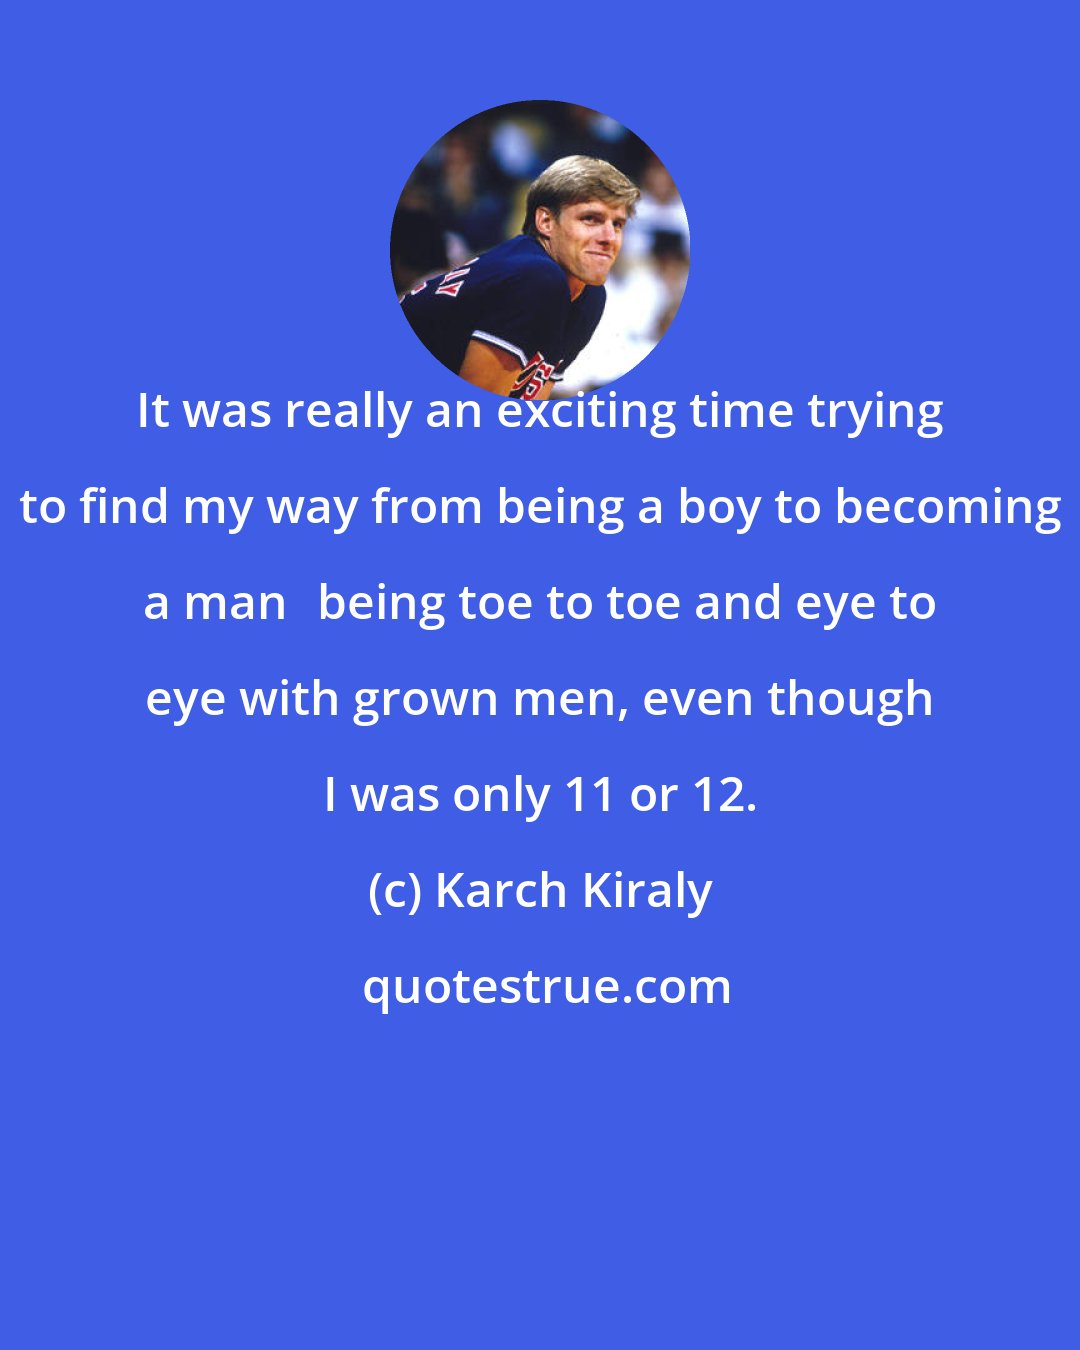 Karch Kiraly: It was really an exciting time trying to find my way from being a boy to becoming a manbeing toe to toe and eye to eye with grown men, even though I was only 11 or 12.